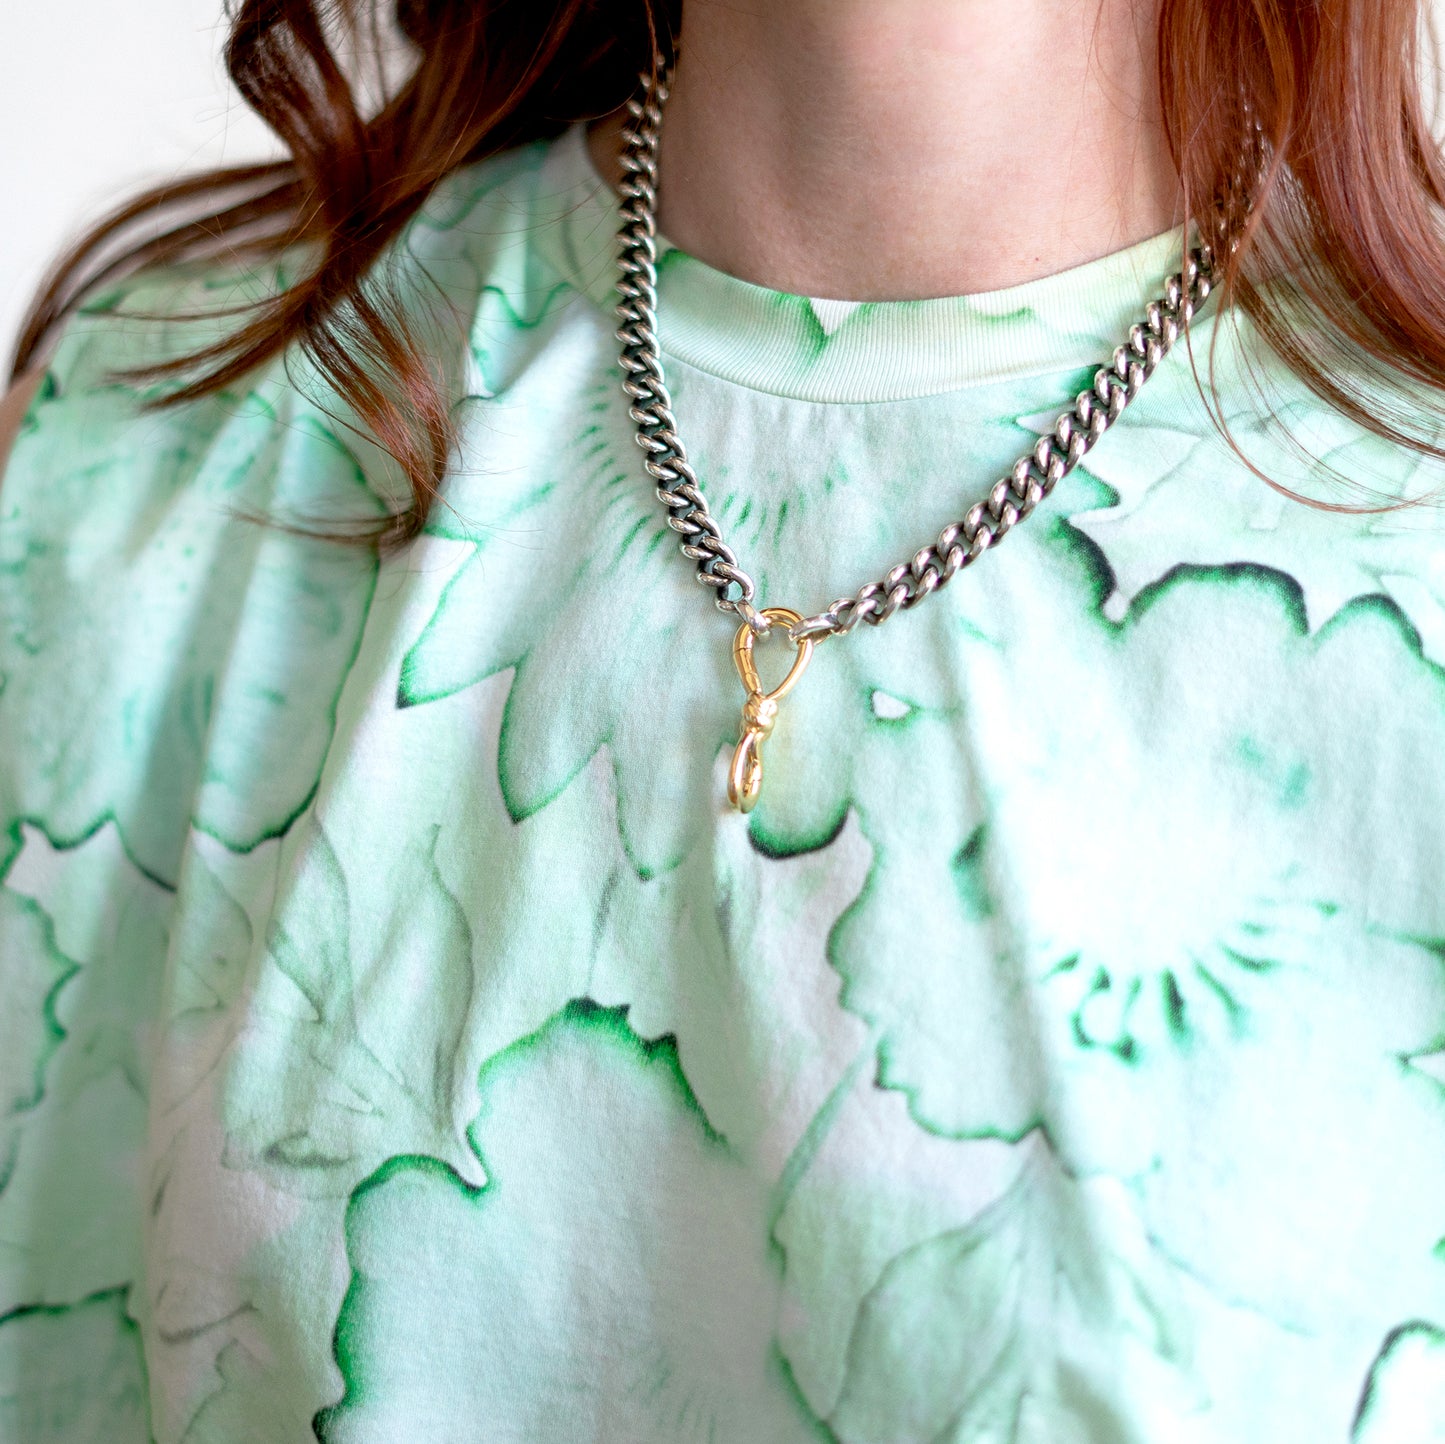 Tabansir Jersey Top in Mint Green Peony